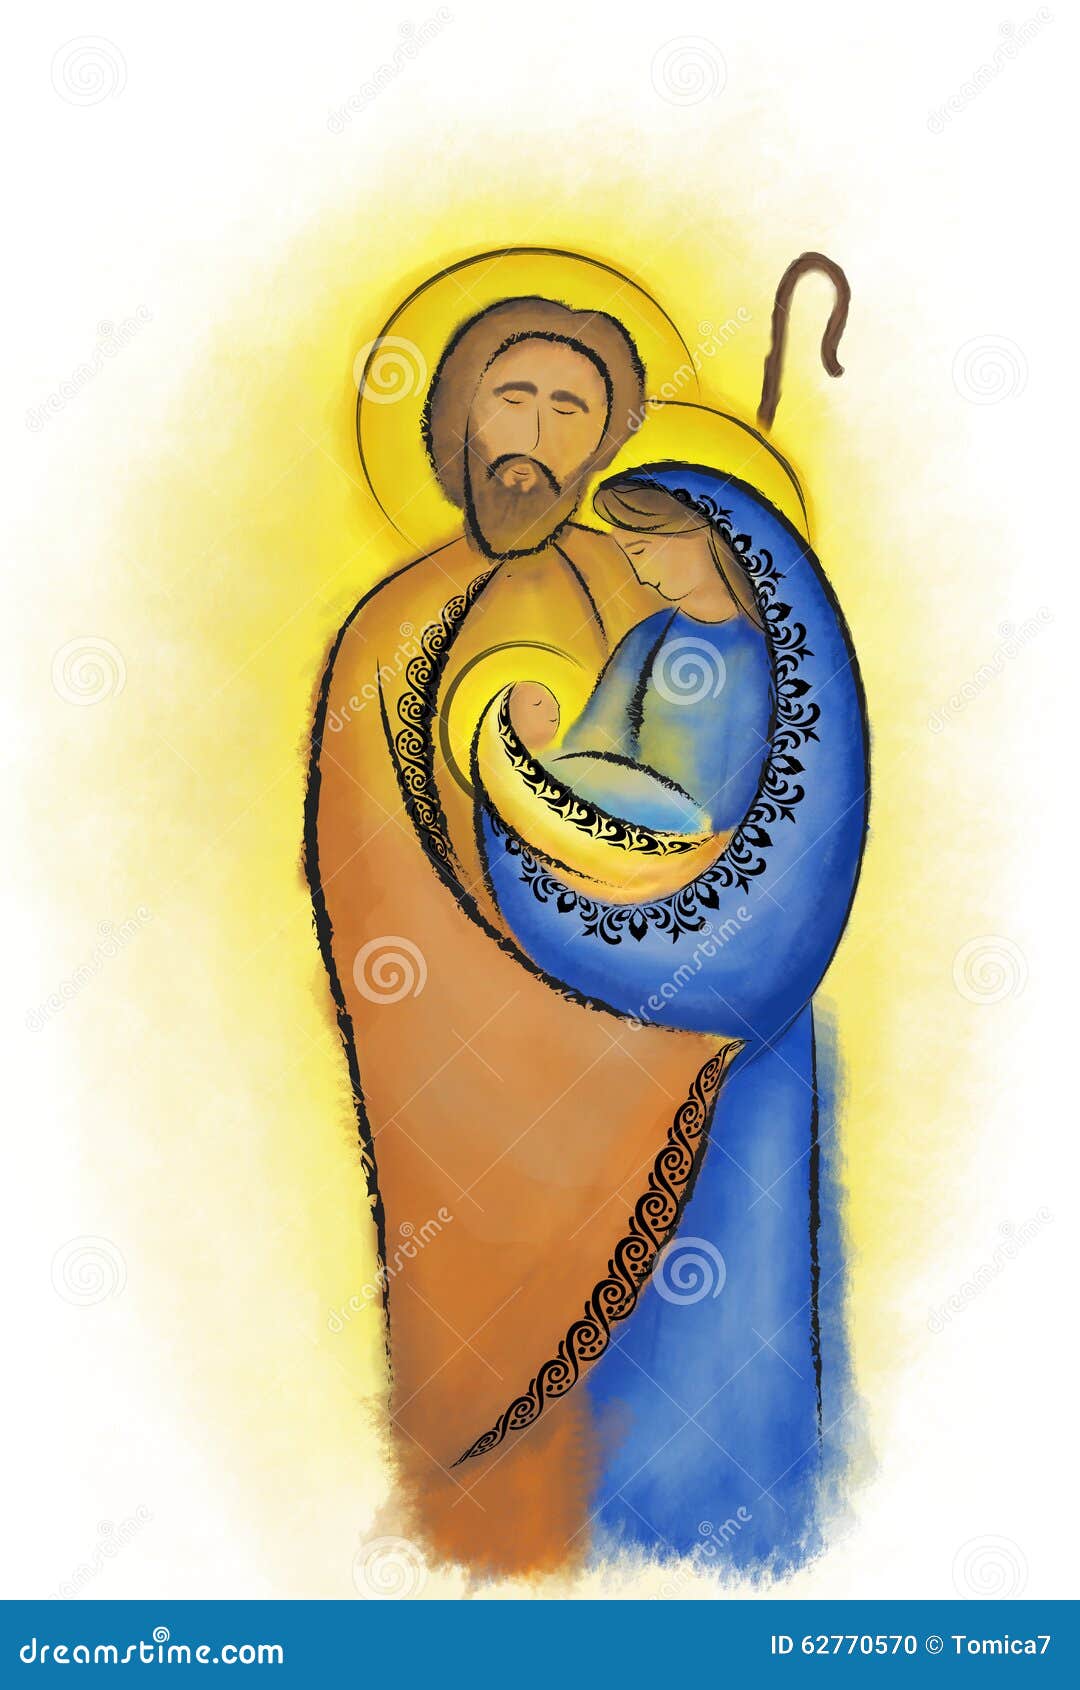 free clip art of the holy family - photo #14